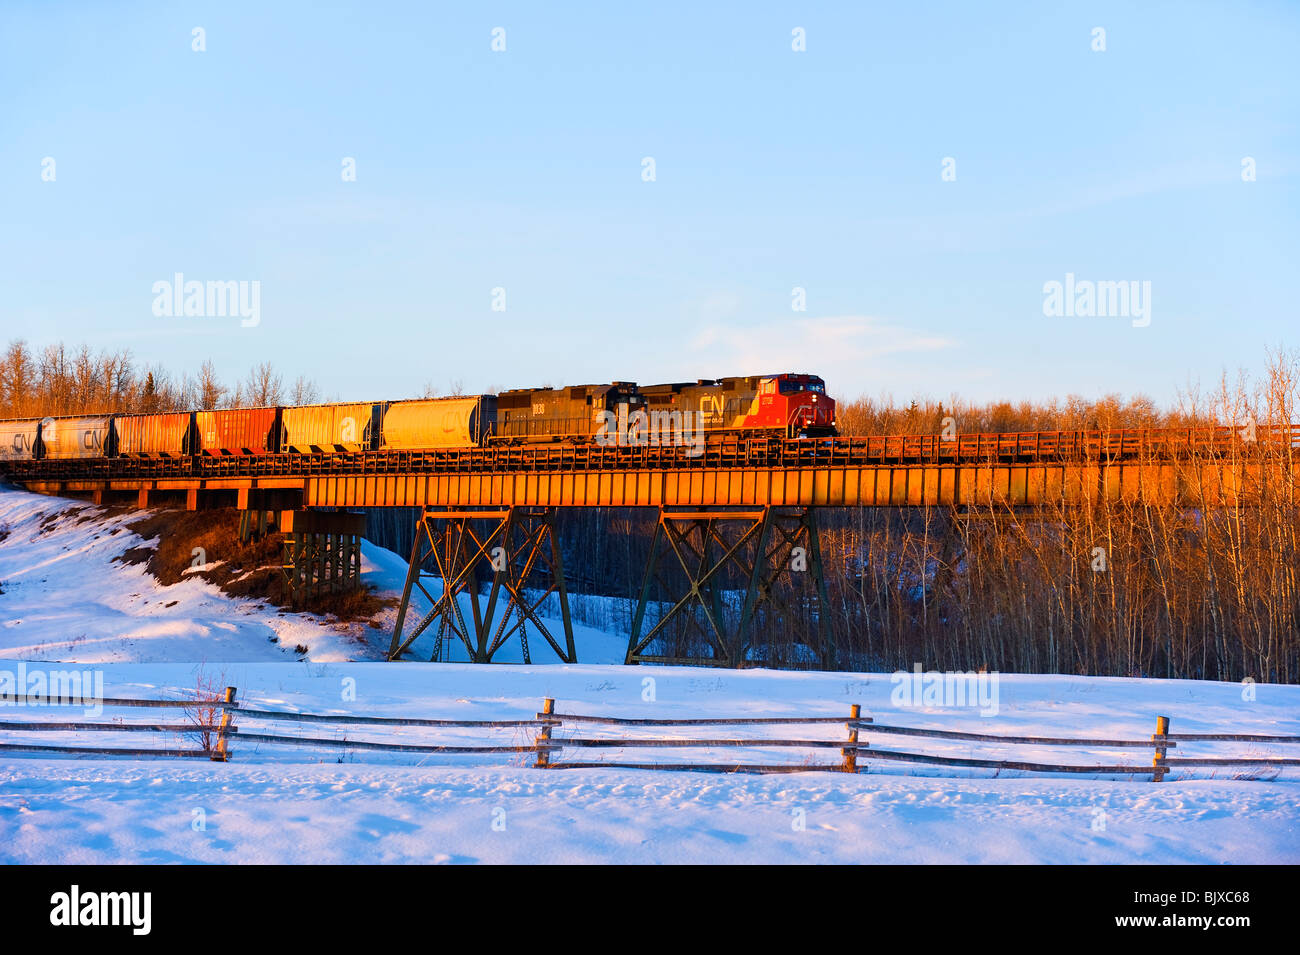 A winter scenic of a Freight train Stock Photo